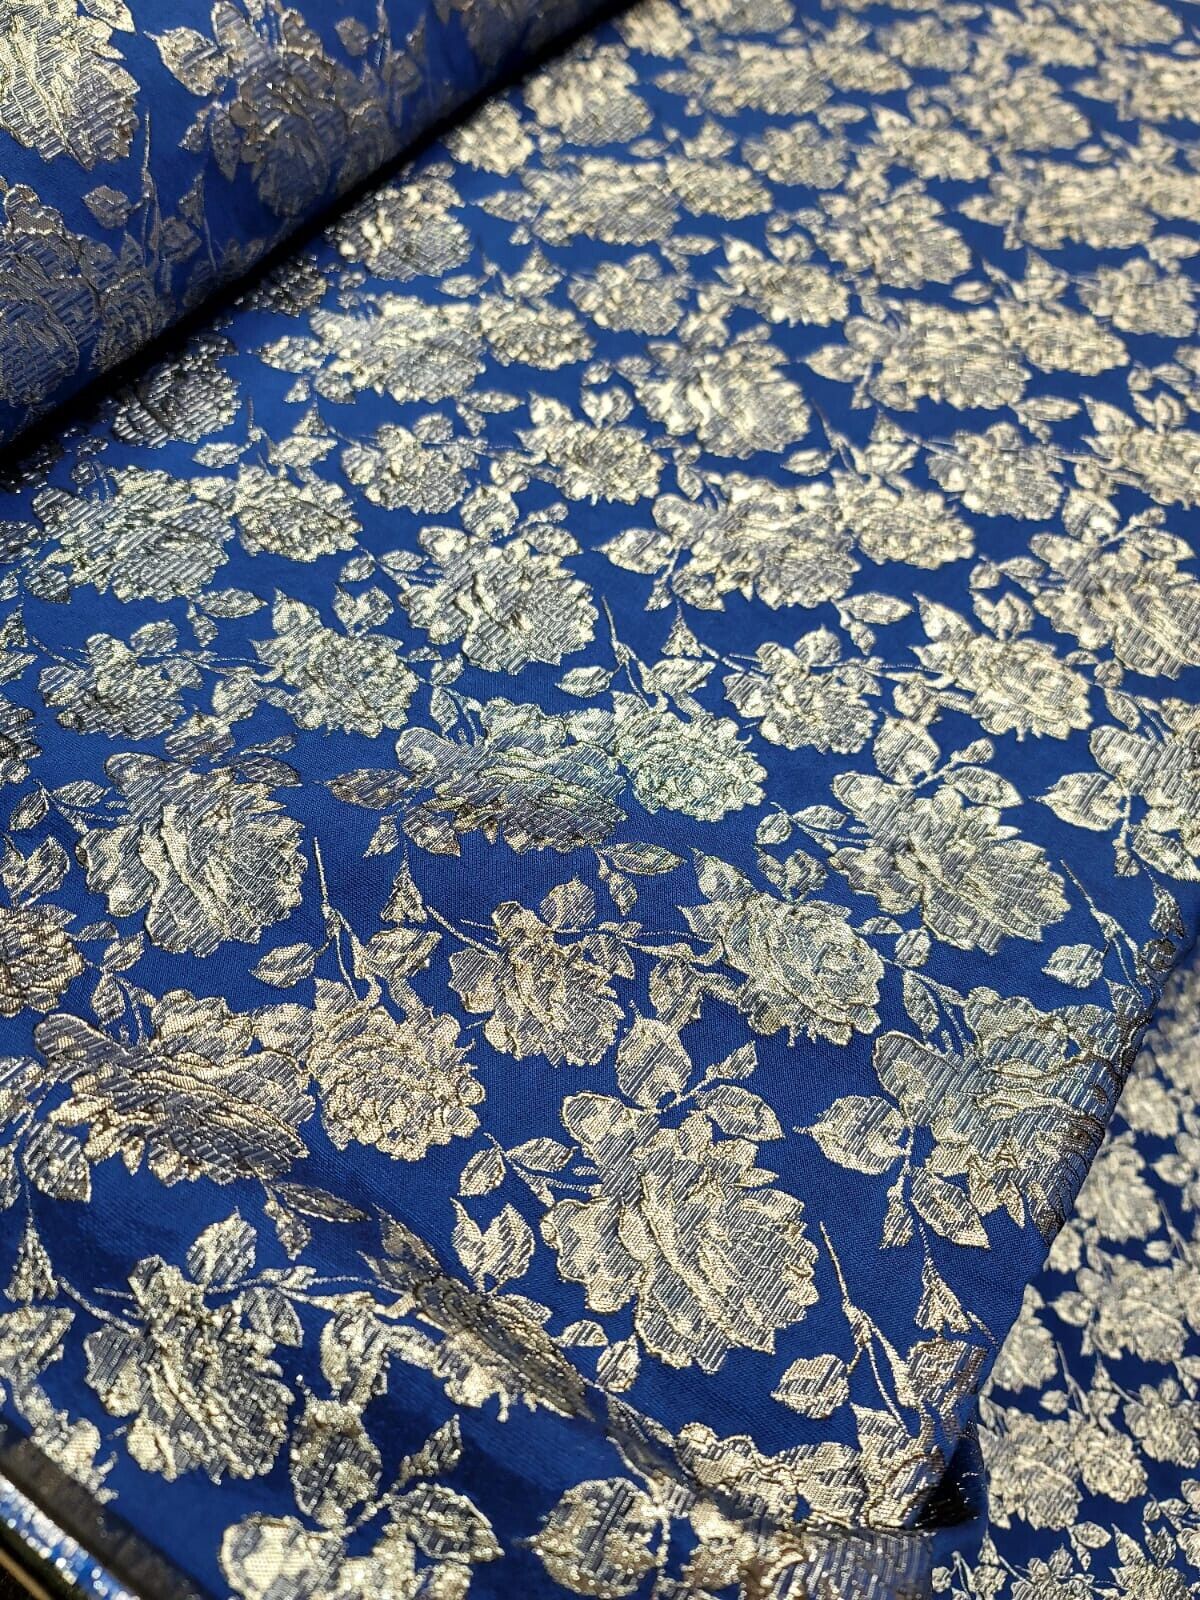 ROYAL BLUE Brocade Fabric (60 in.) Sold By The Yard METALLIC SILVER FLORAL EMBOS